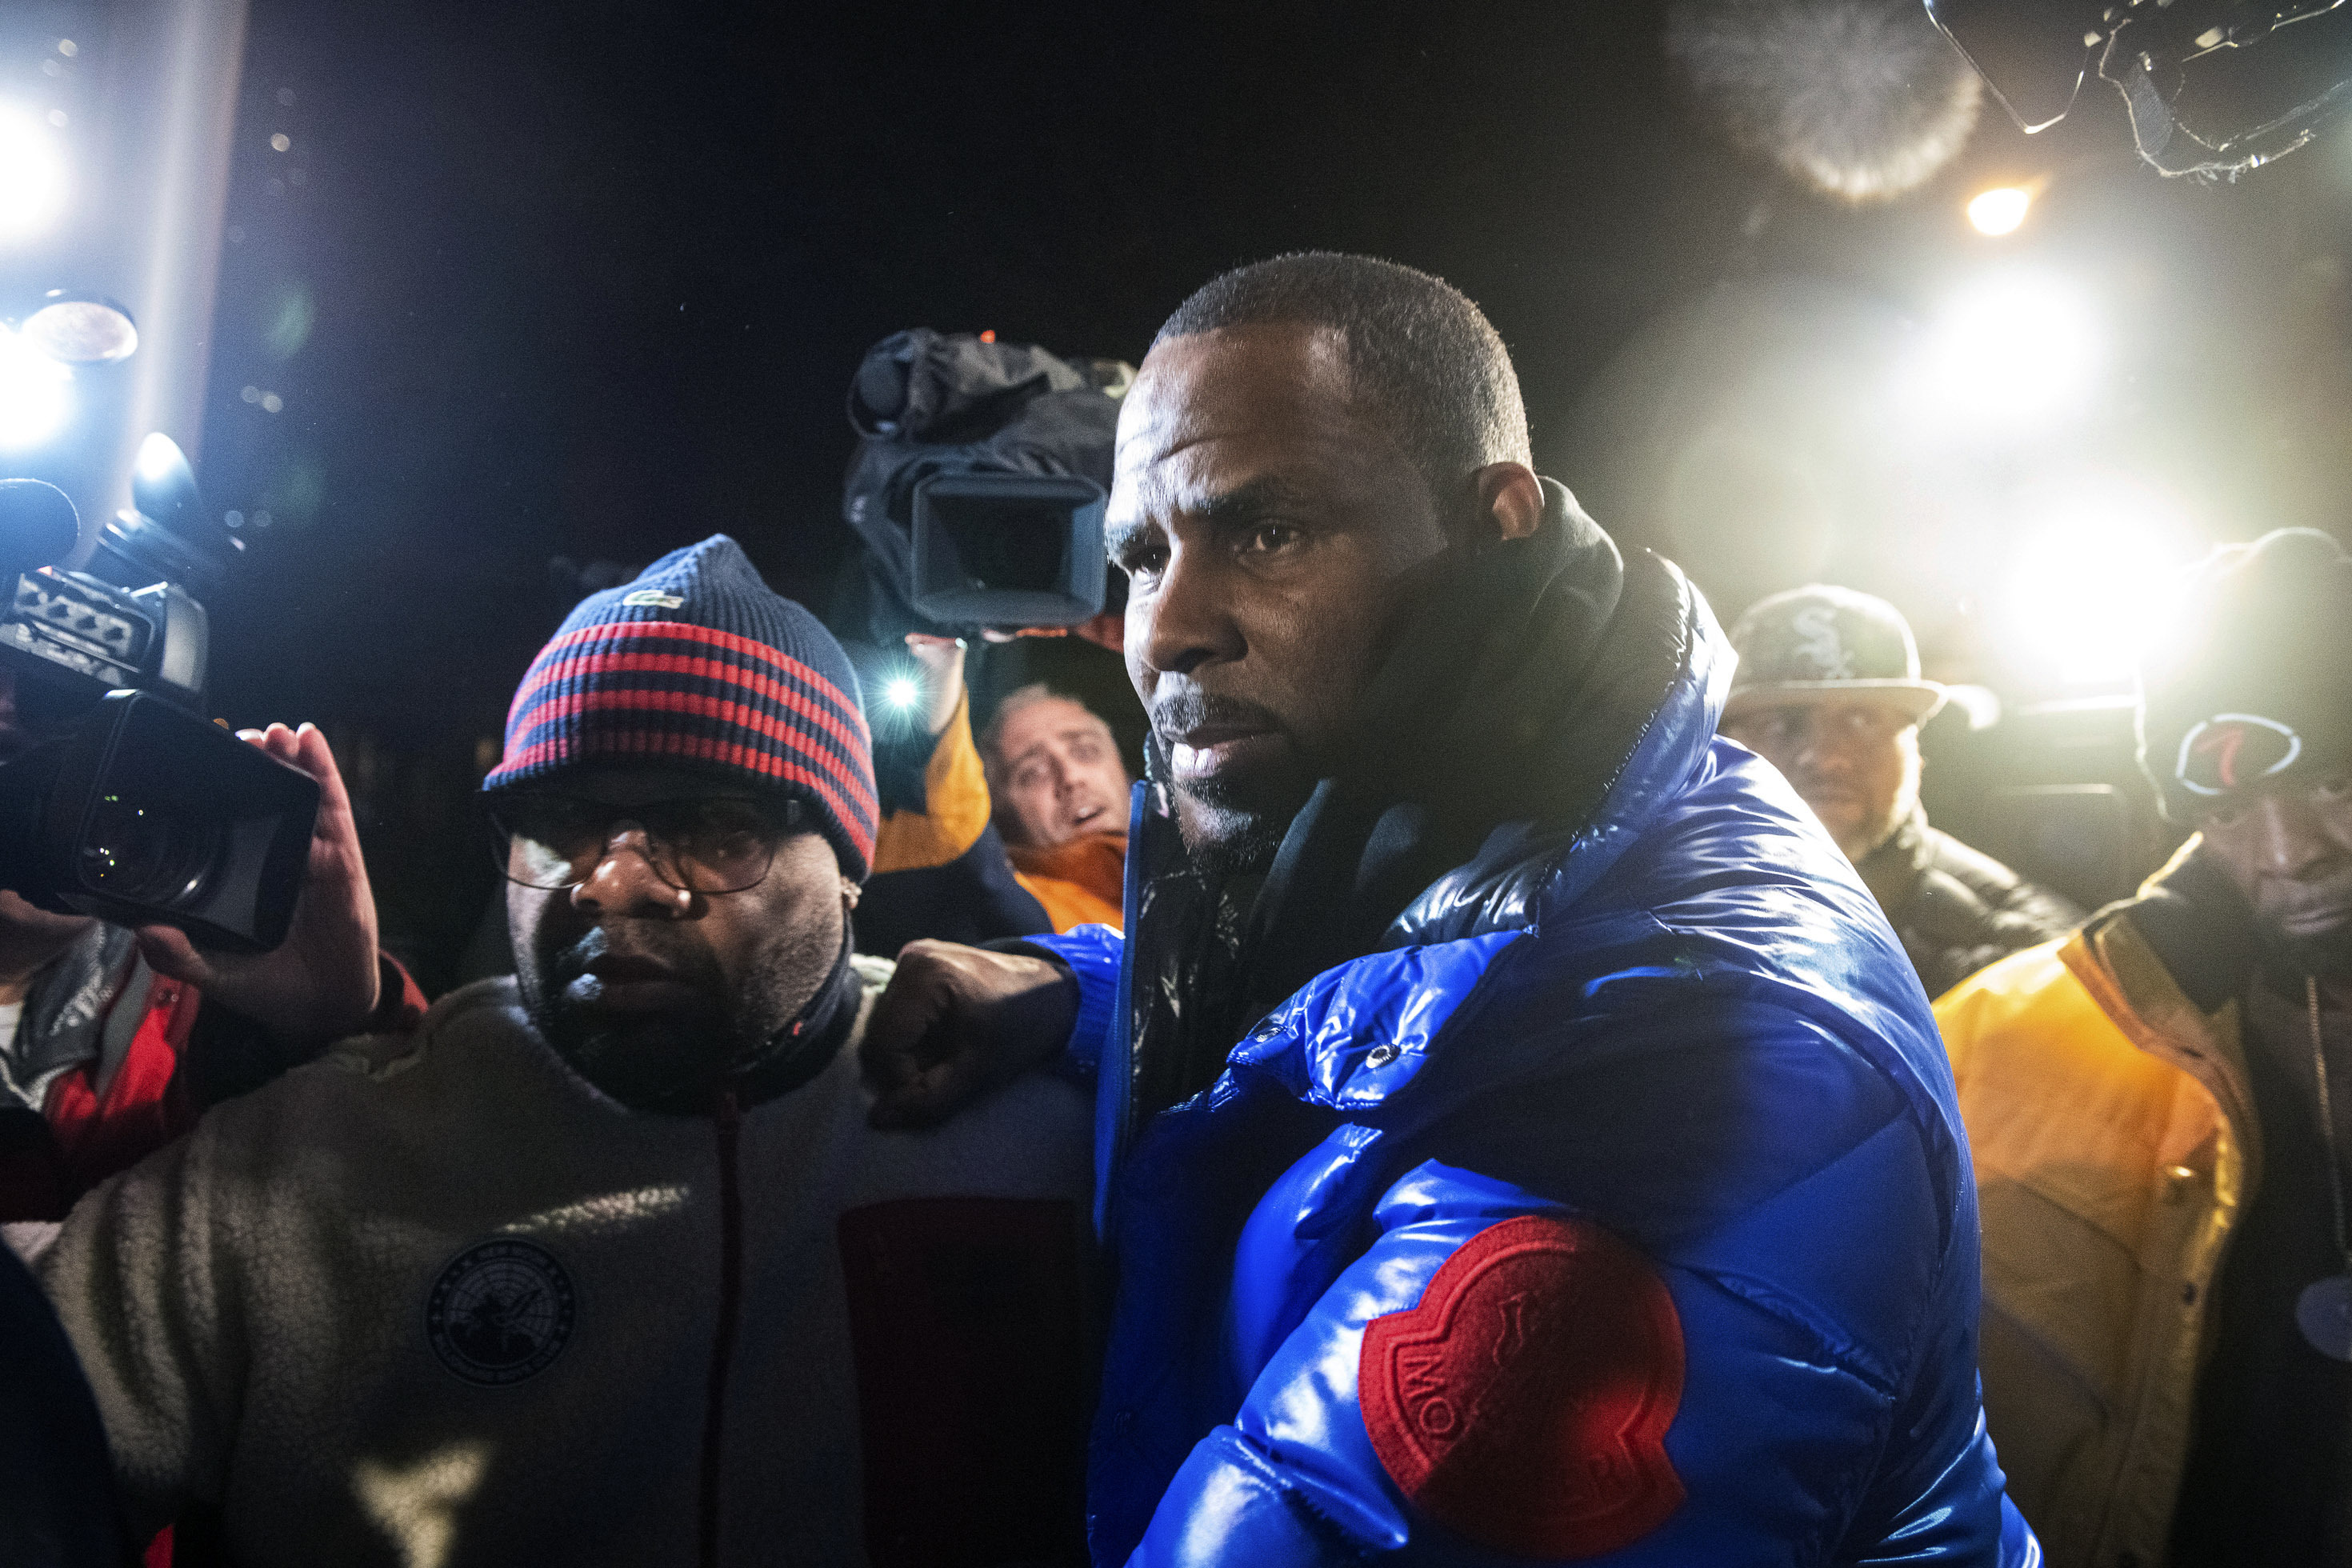 R. Kelly surrenders to authorities at Chicago First District police station, Friday, Feb. 22, 2019.  R&B star R. Kelly was taken into custody after arriving Friday night at a Chicago police precinct, hours after authorities announced multiple charges of aggravated sexual abuse involving four victims, including at least three between the ages of 13 and 17. (Tyler LaRiviere/Chicago Sun-Times via AP)